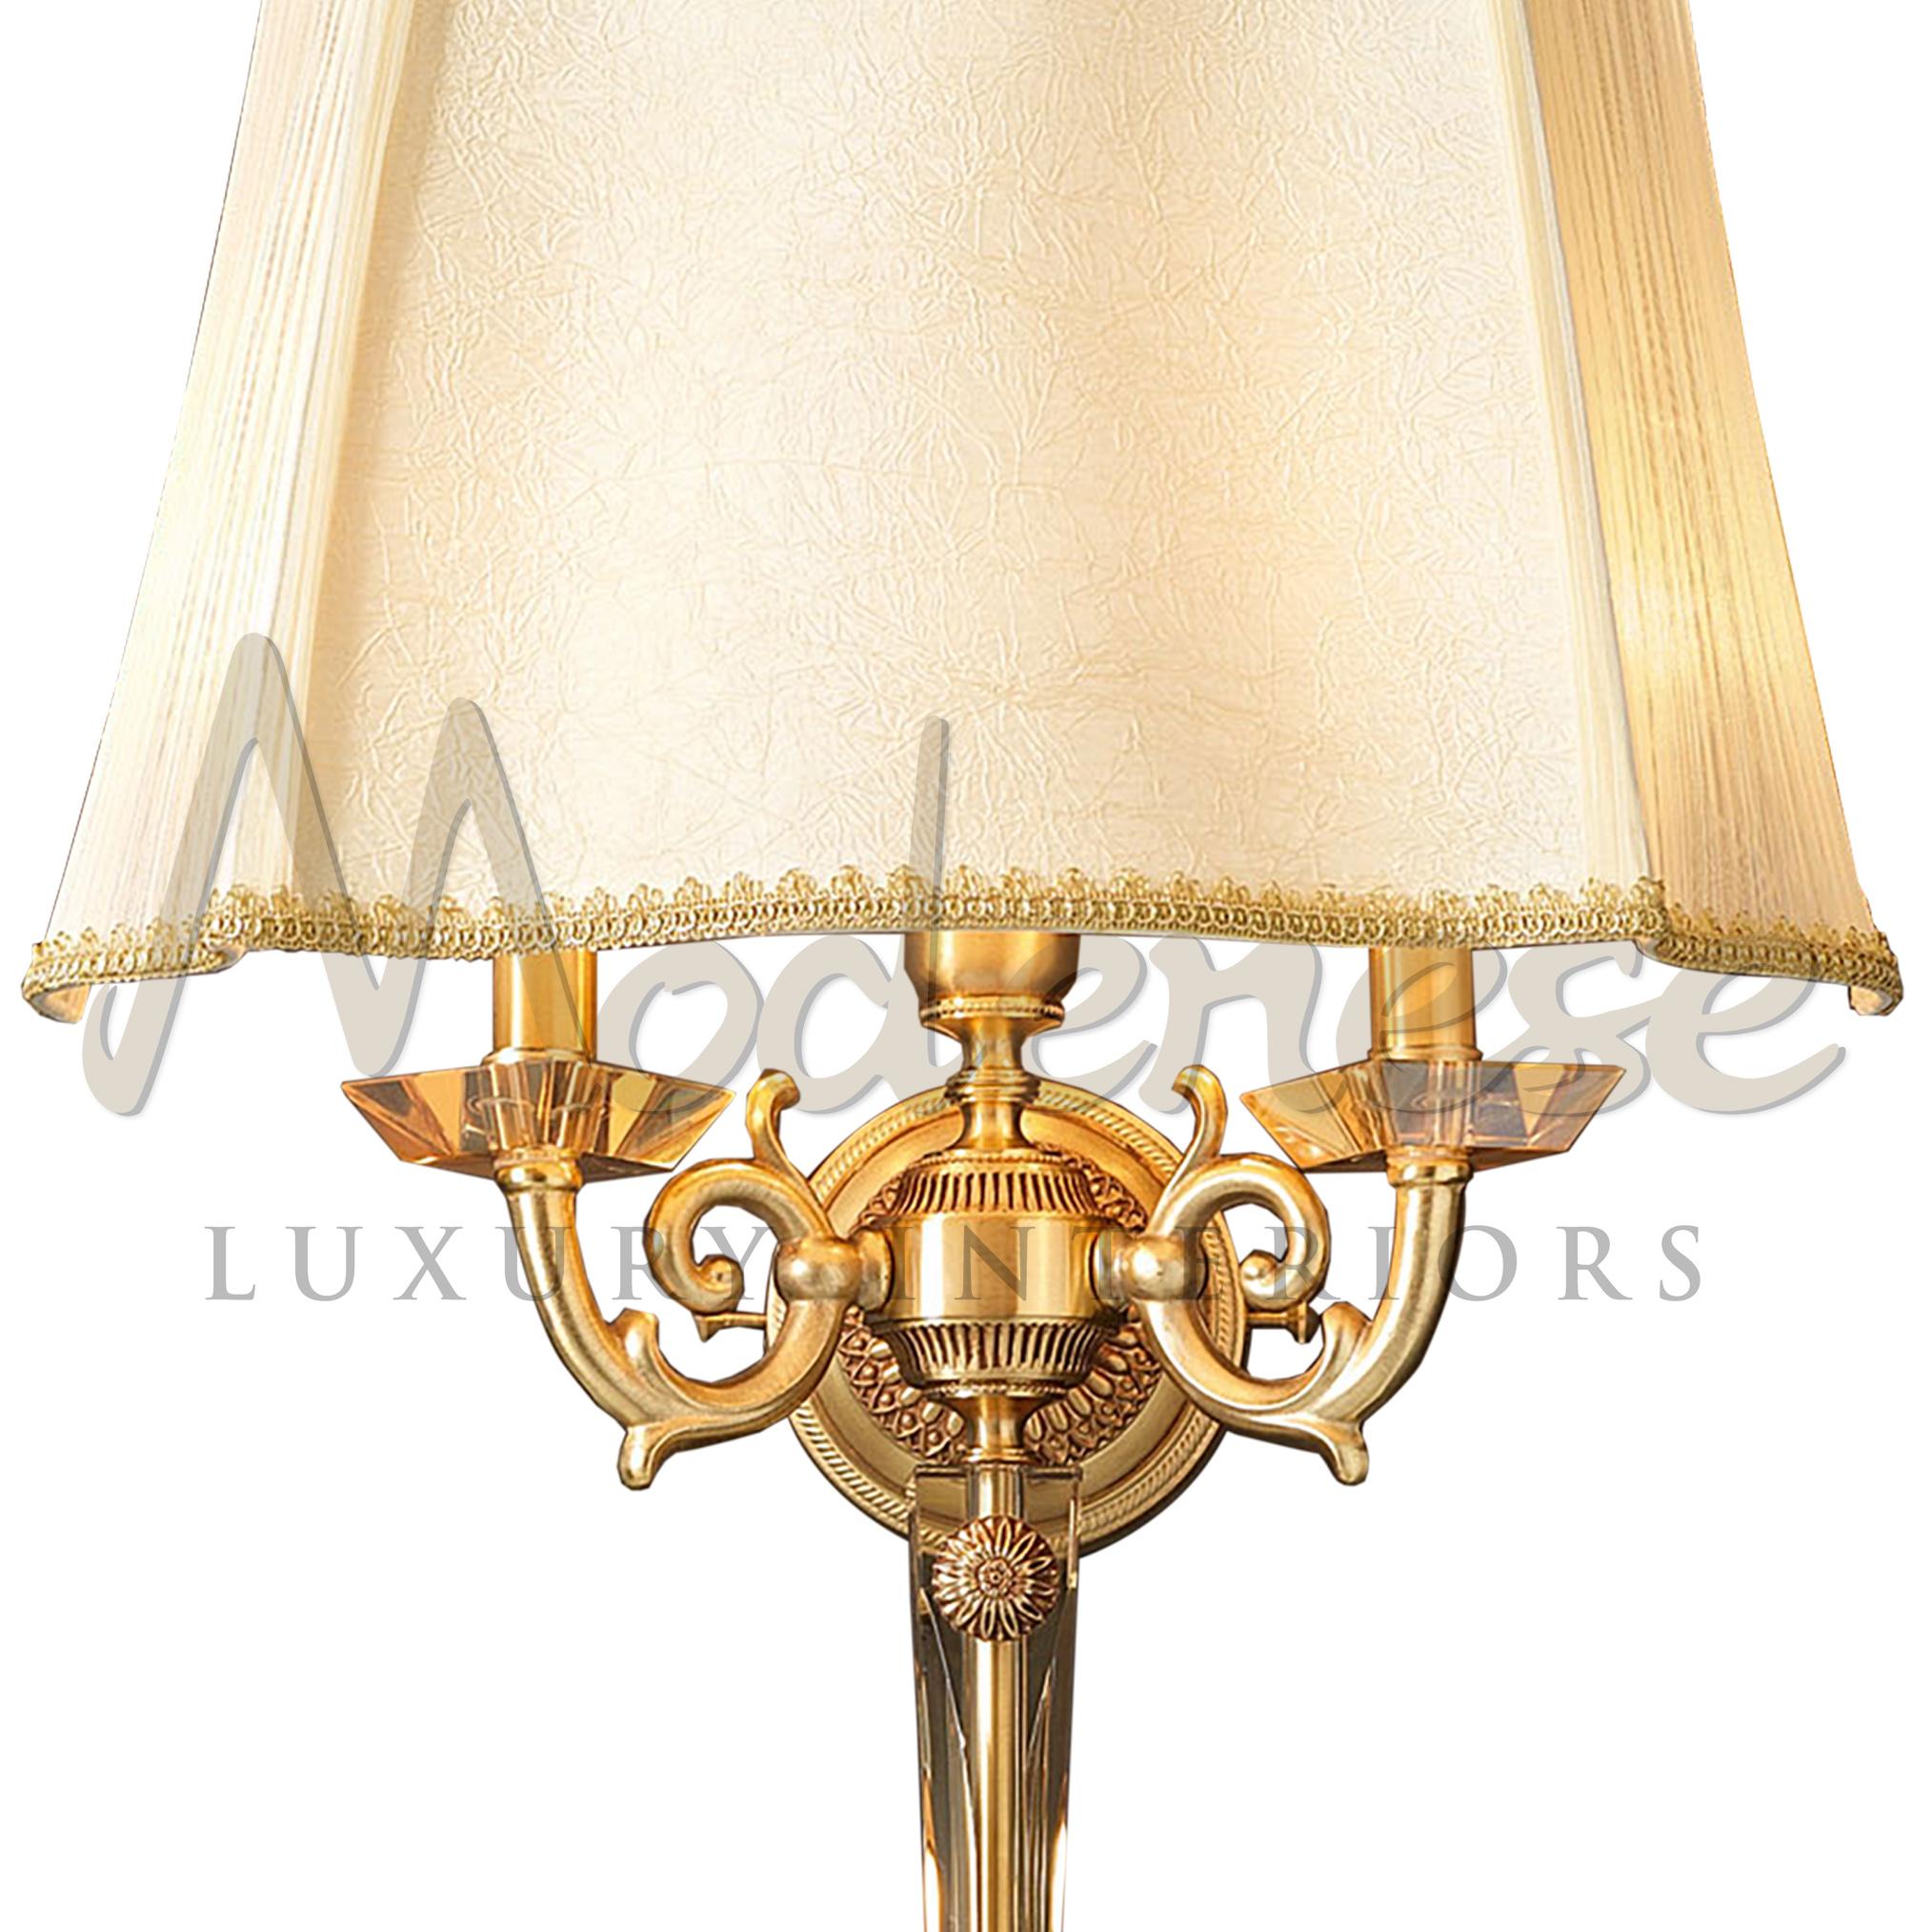 This classic wall lamp model is distinguished by a combination of sophisticated restraint, unique charm, chic beauty and luxury, combining french gold brass finishing and shade. This model requires 2 single E14 screw fit light bulbs (40Watt max) and